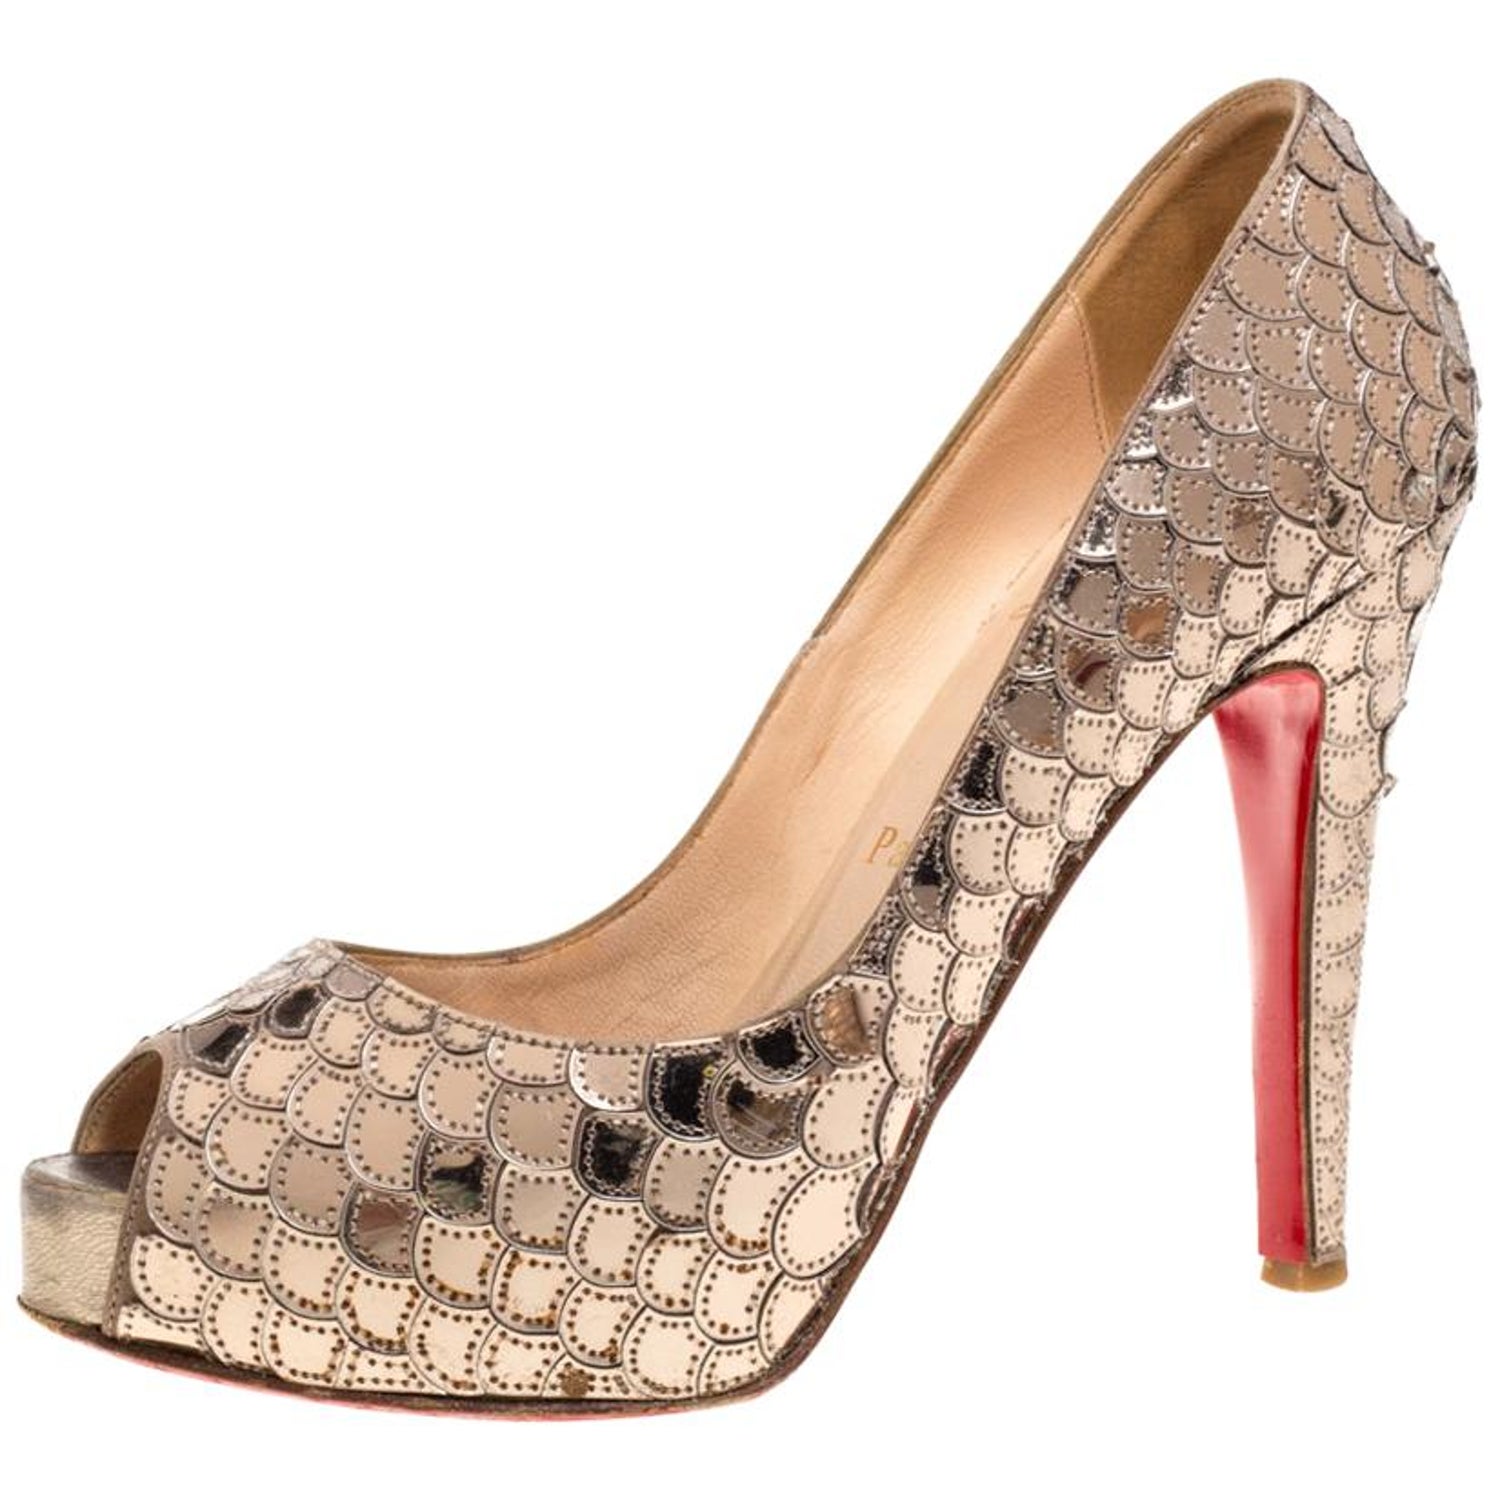 Christian Louboutin Beige Net And Mesh Zipper Detail Ankle Boots